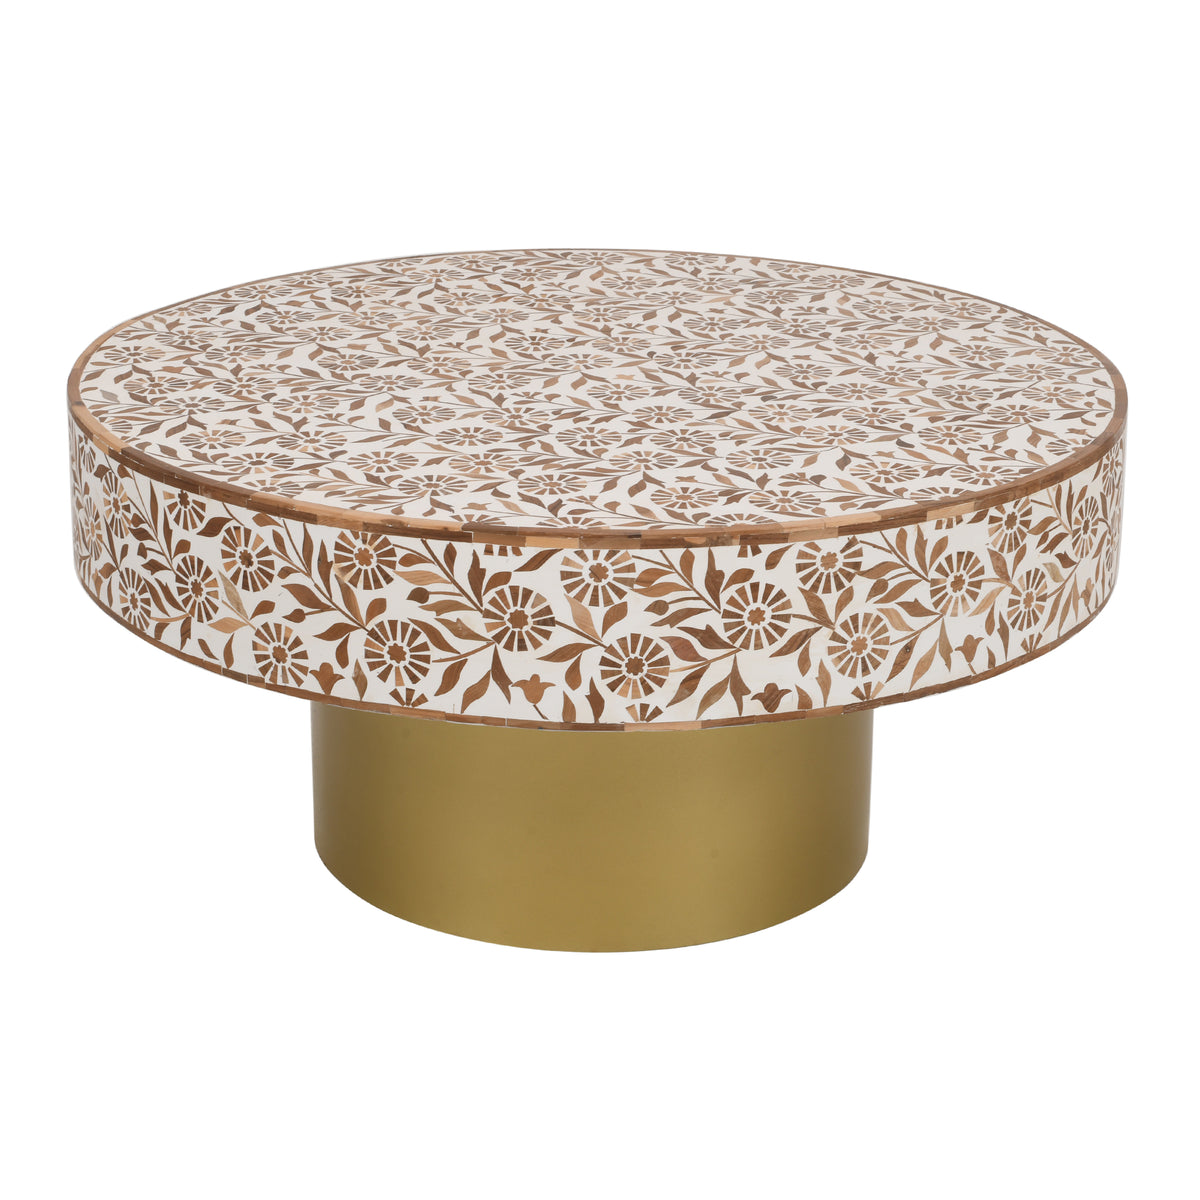 Flannel Flower Round Coffee Table - Natural / White COF339